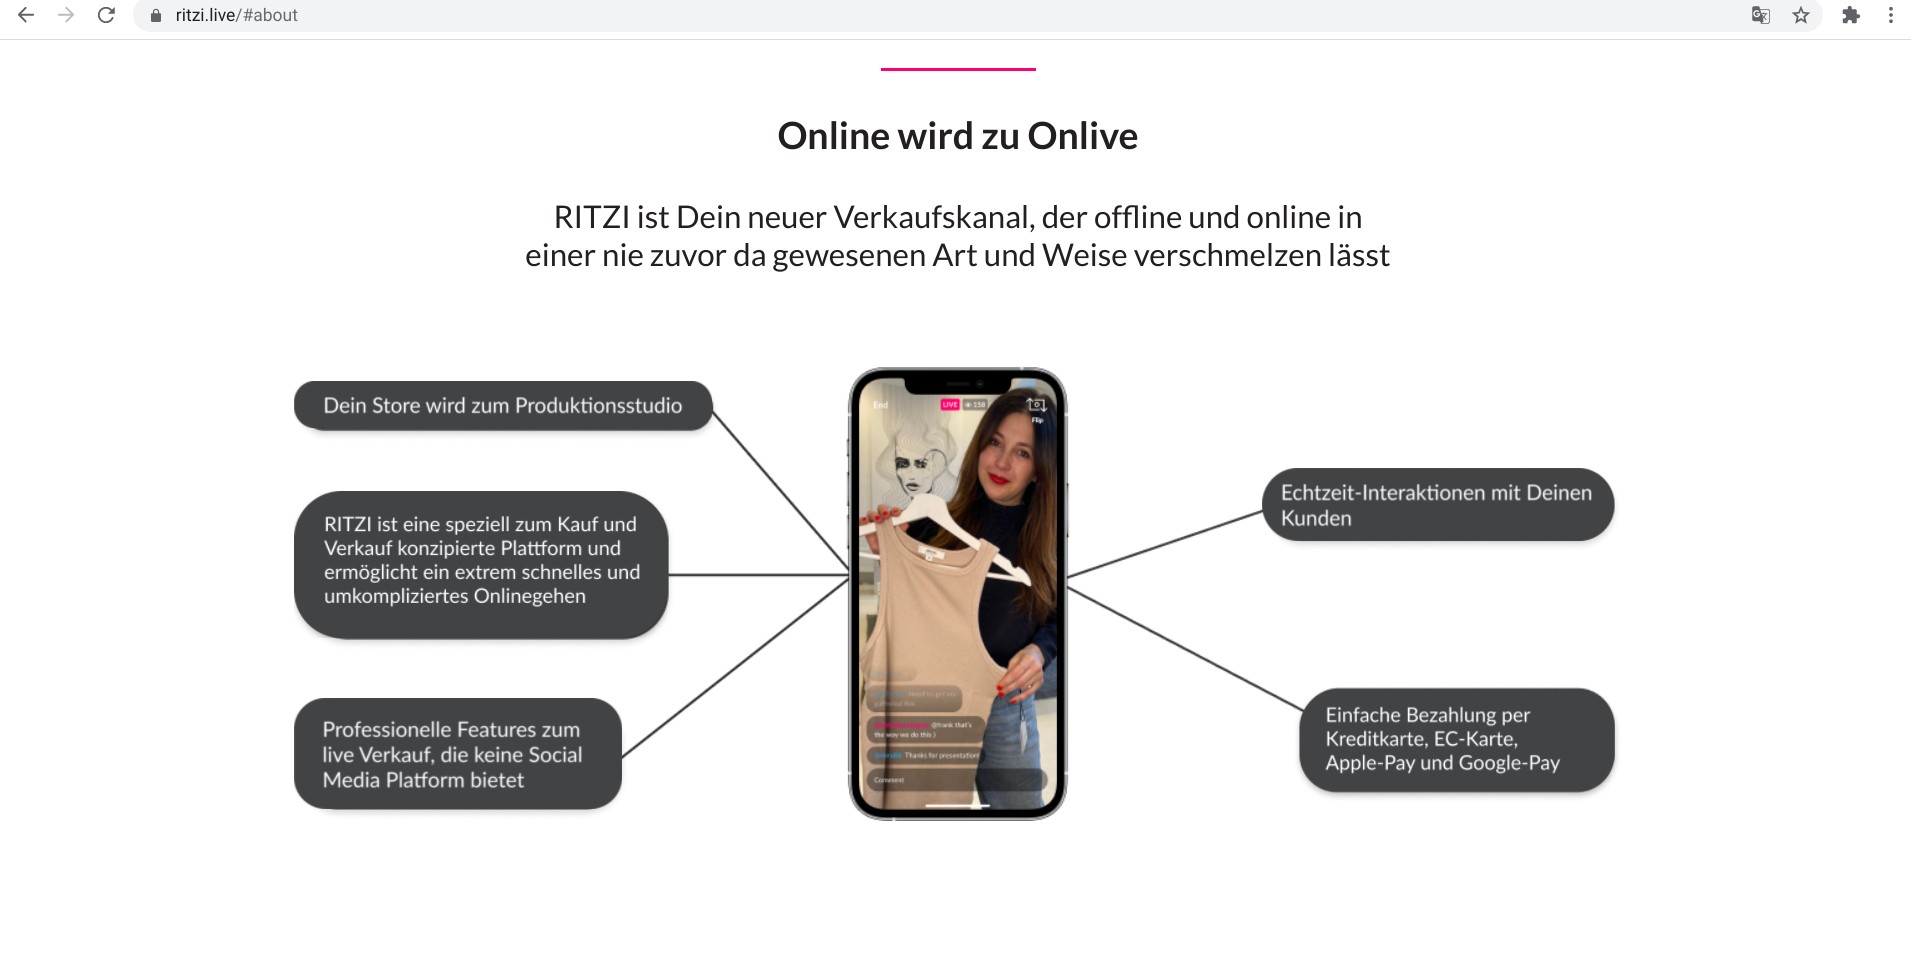 Screenshot of an explanatory image with title “Online becomes onlive” including explanations of the App Ritzi on ritzi.live/about